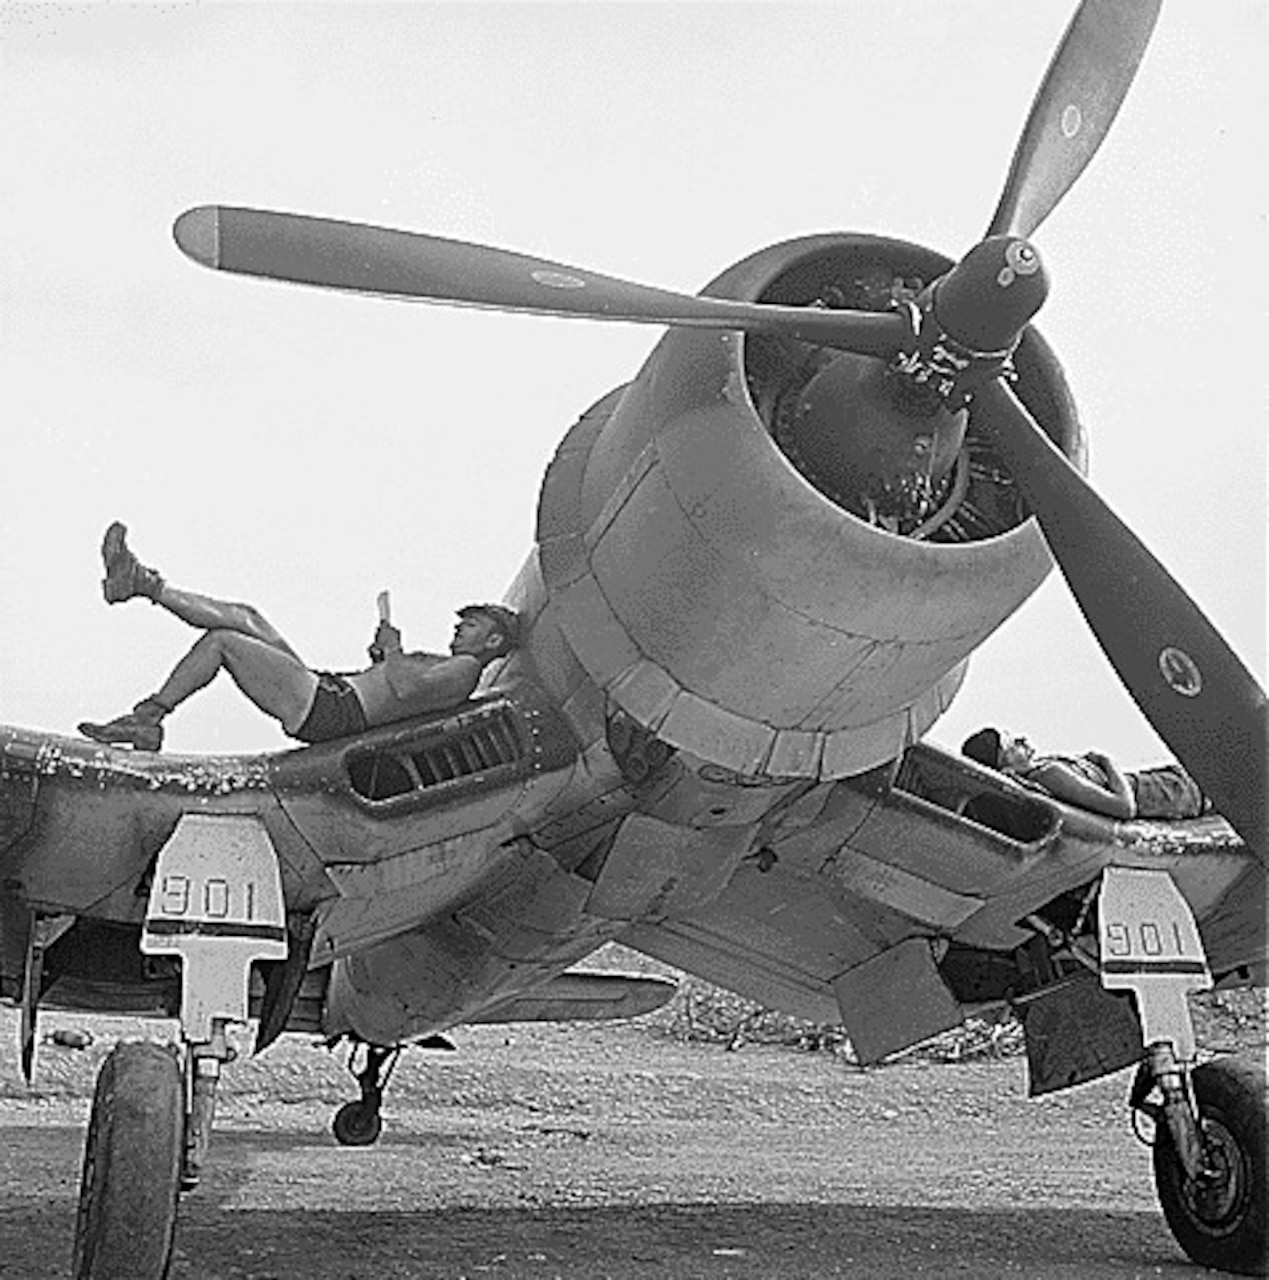 Two men lie on the wings of a propeller aircraft.